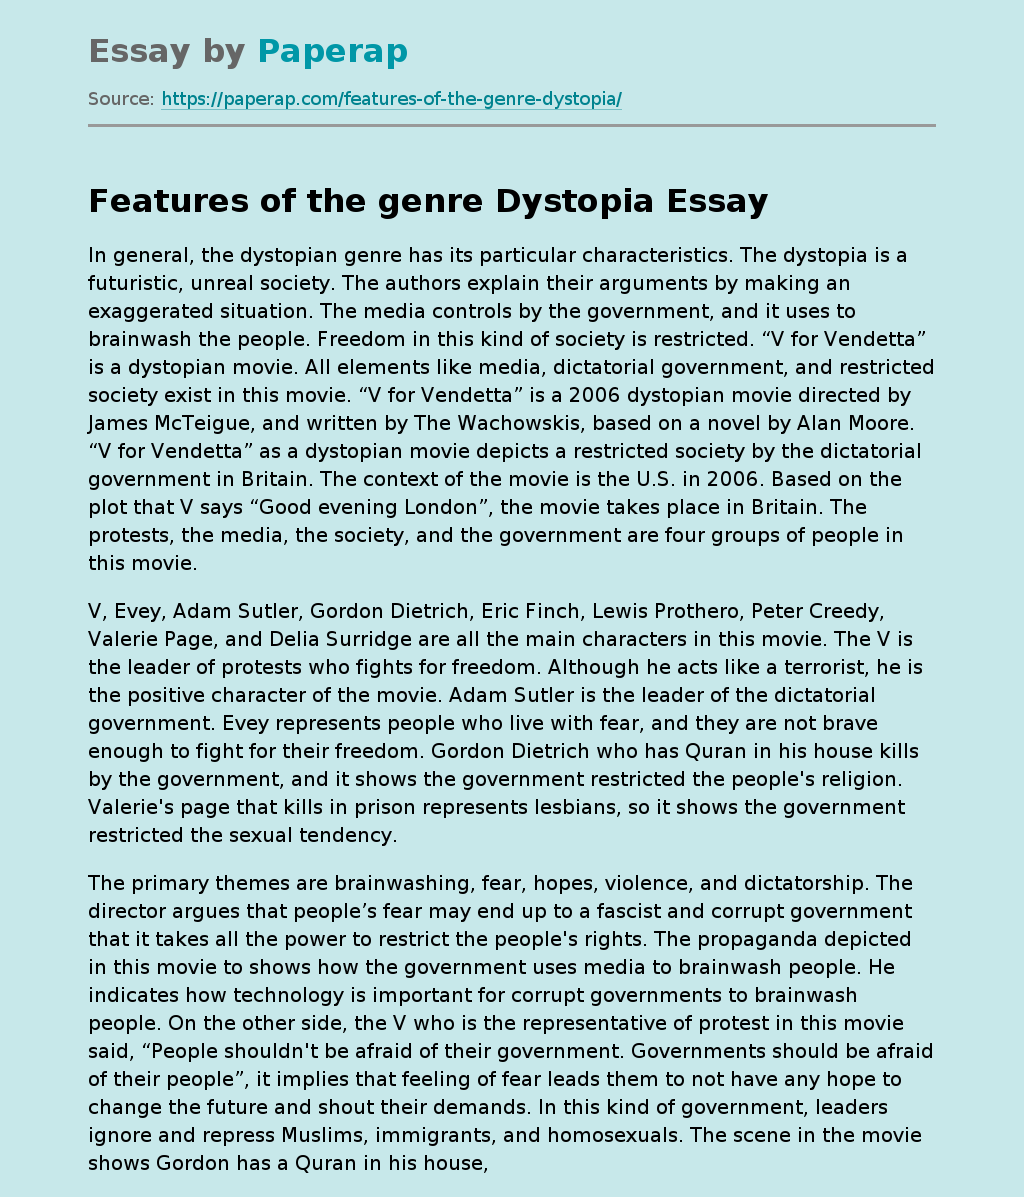 Features of the genre Dystopia